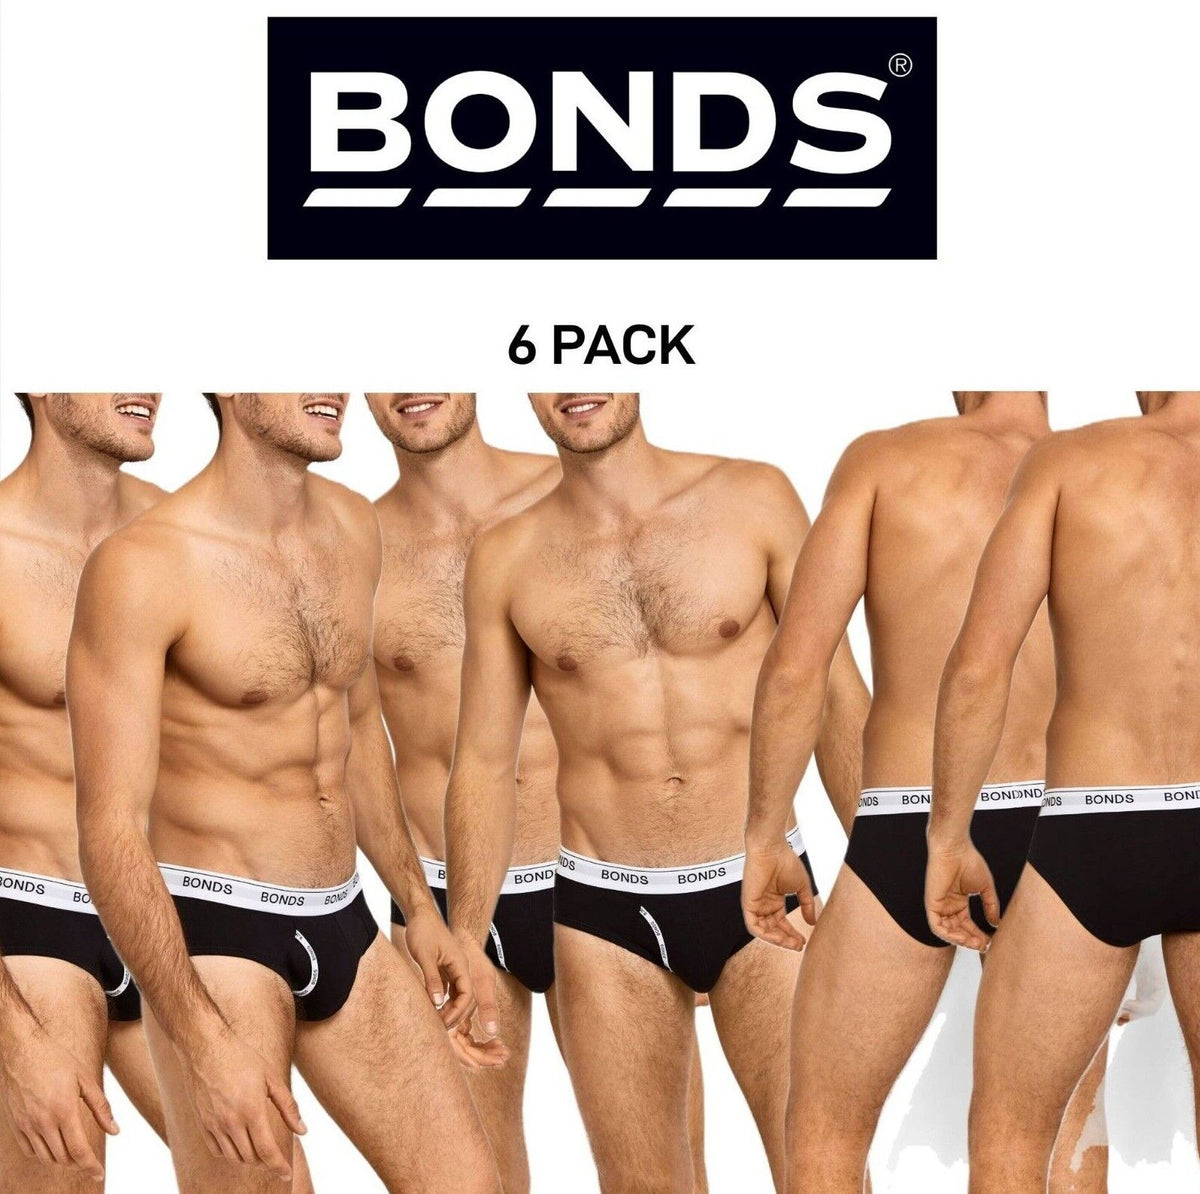 Bonds Mens Guyfront Brief Soft and Stretchy Cotton Functional Fly 6 Pack MZVI